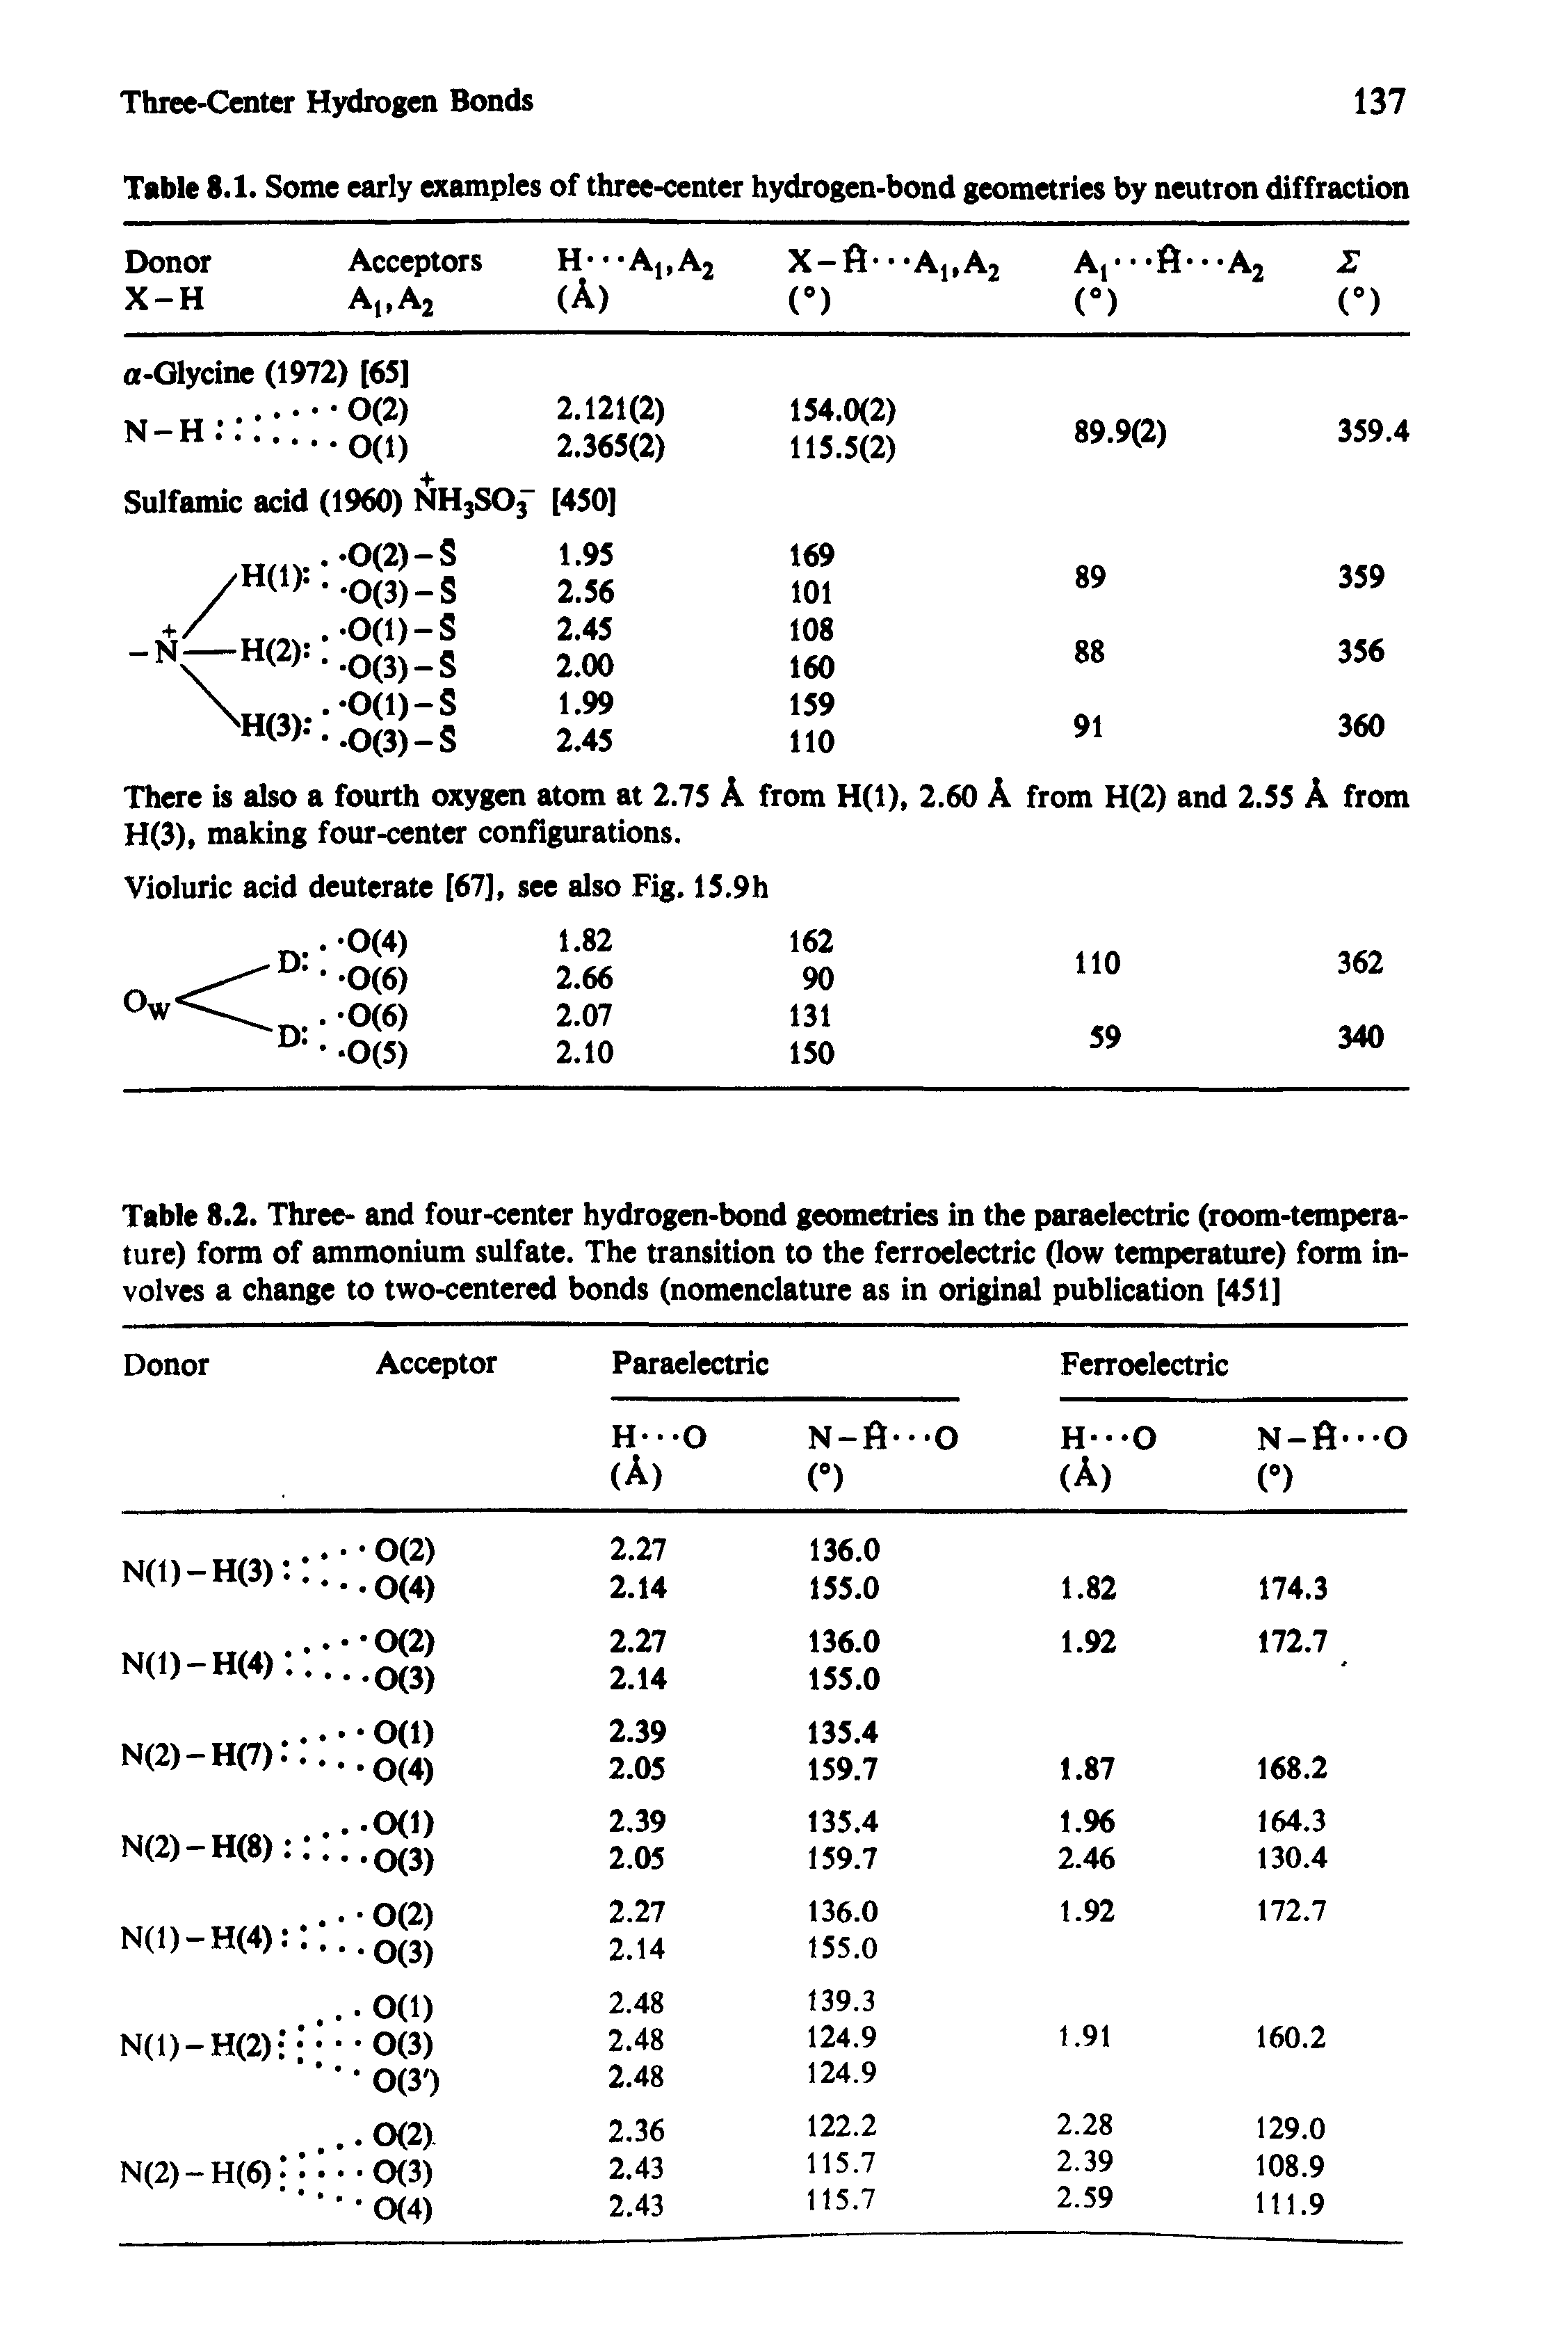 Table 8.2. Three- and four-center hydrogen-bond geometries in the paraelectric (room-temperature) form of ammonium sulfate. The transition to the ferroelectric (low temperature) form involves a change to two-centered bonds (nomenclature as in original publication [451]...